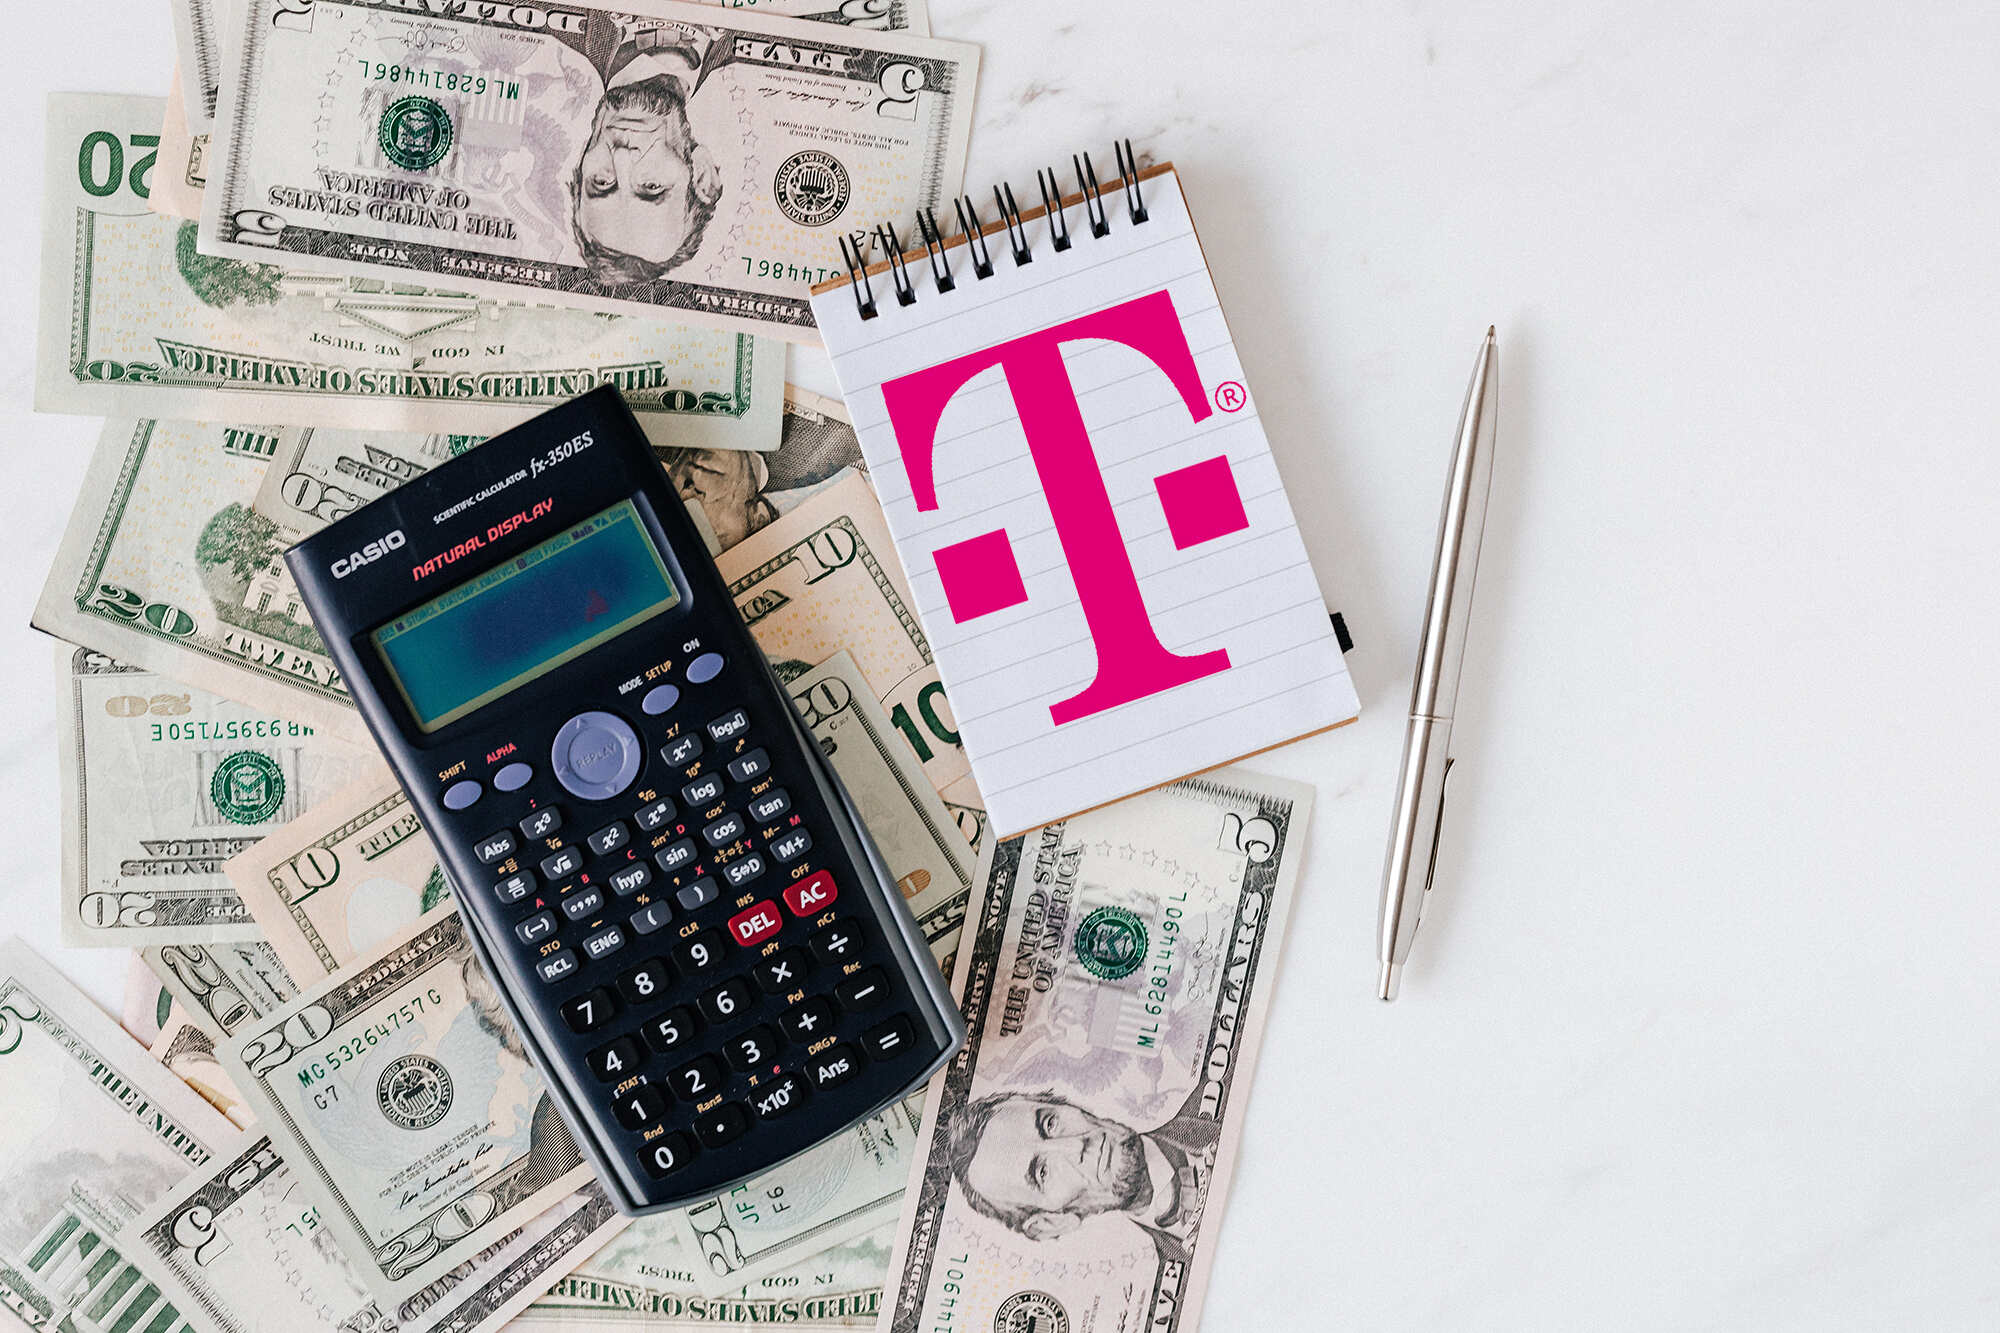 t-mobile-jump-plans-are-officially-a-bad-deal